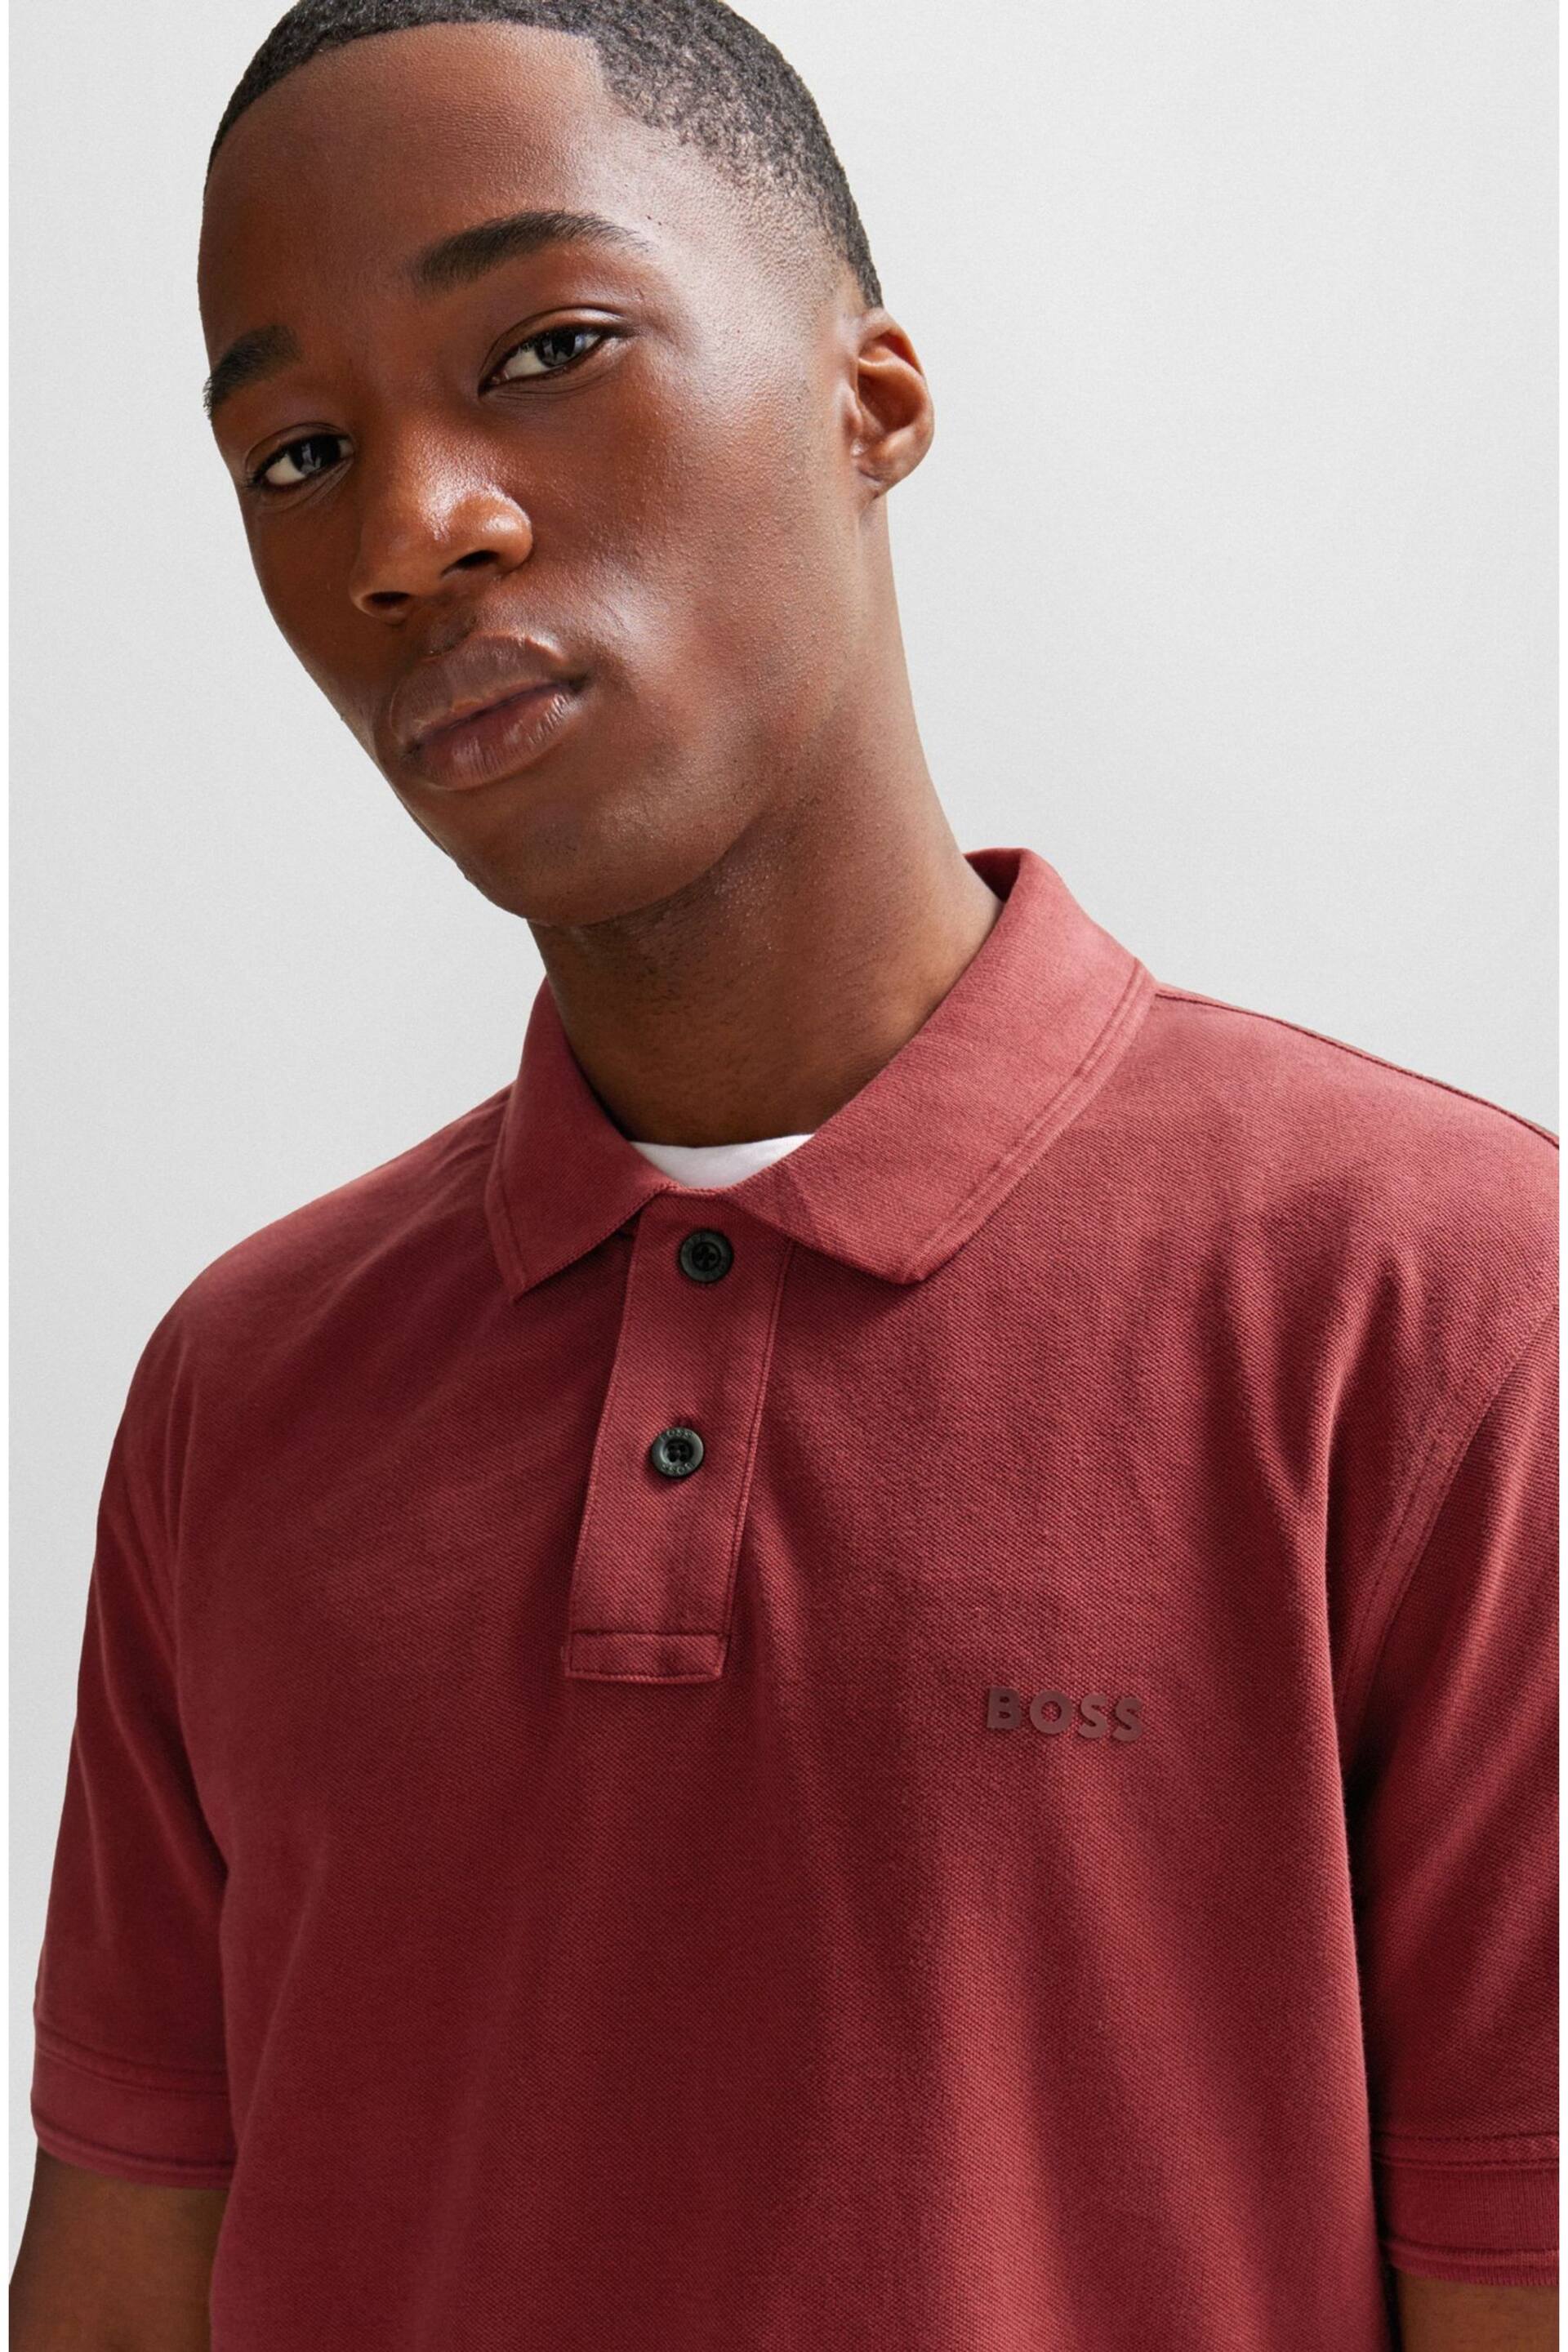 BOSS Red Cotton Pique Polo Shirt - Image 4 of 5